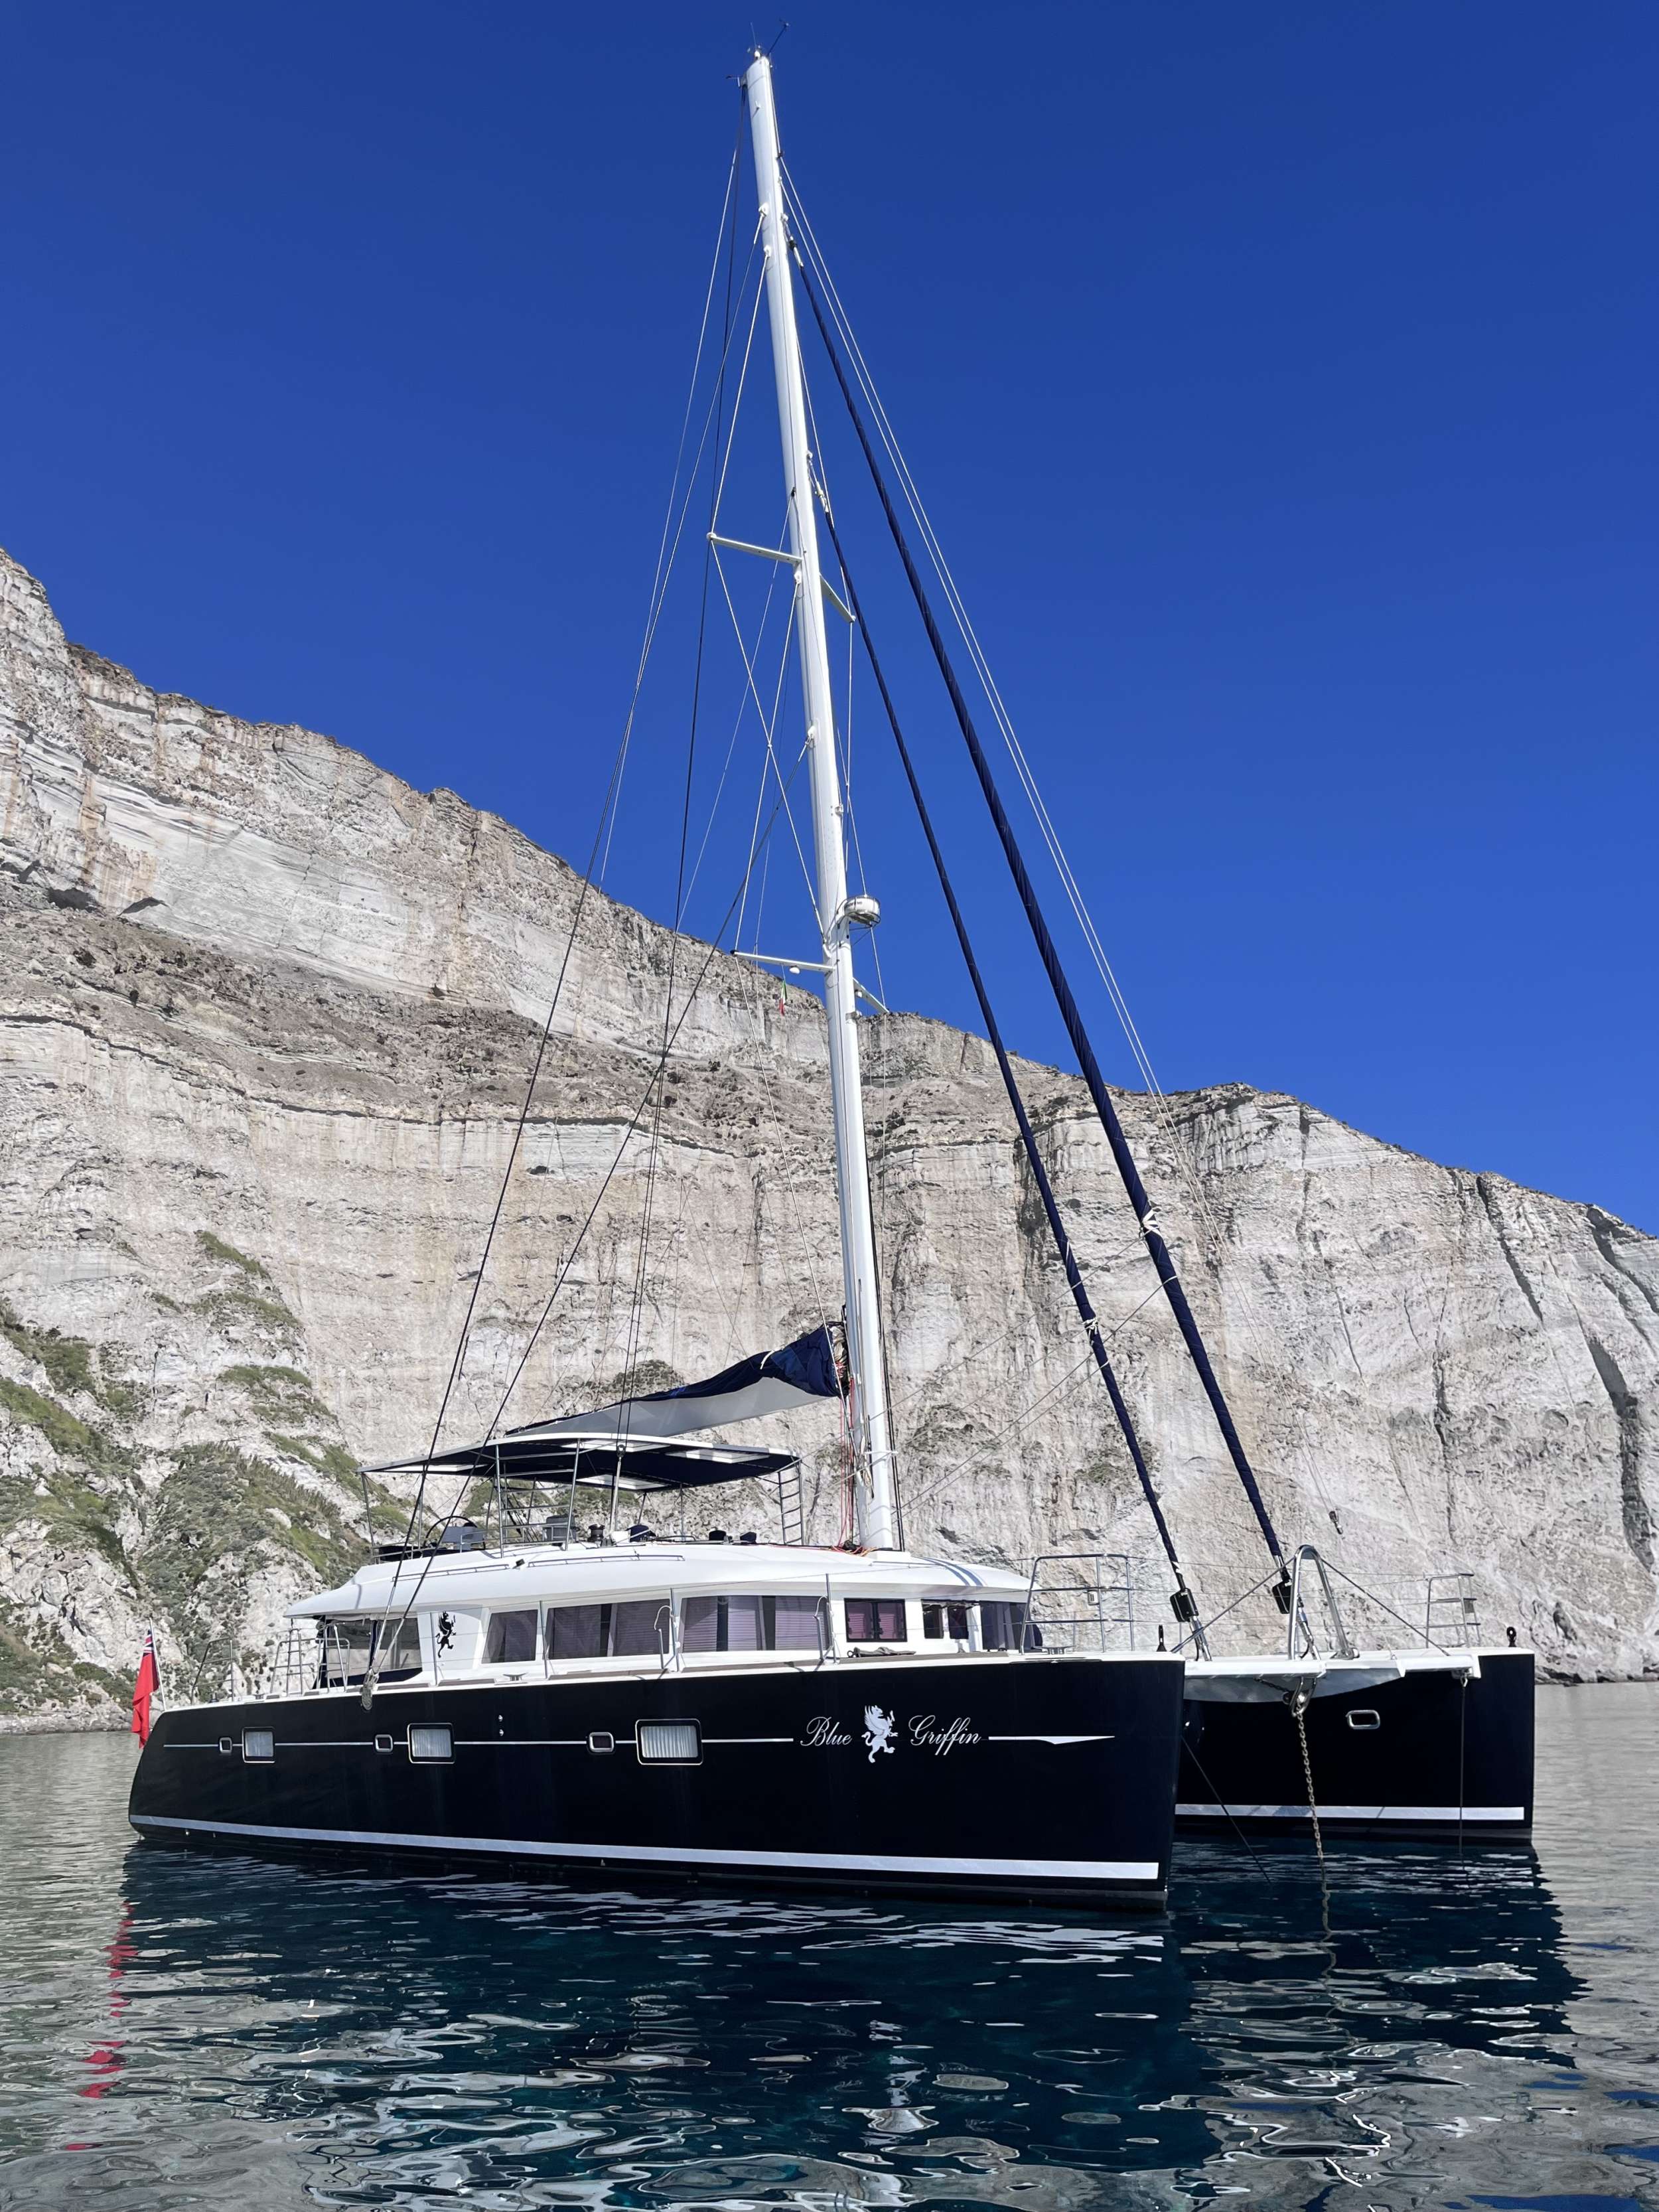 Blue Griffin  - Yacht Charter Caorle & Boat hire in W. Med -Naples/Sicily, Greece, W. Med -Riviera/Cors/Sard., Turkey, Croatia | Winter: Caribbean Virgin Islands (US/BVI), Caribbean Leewards, Caribbean Windwards 1